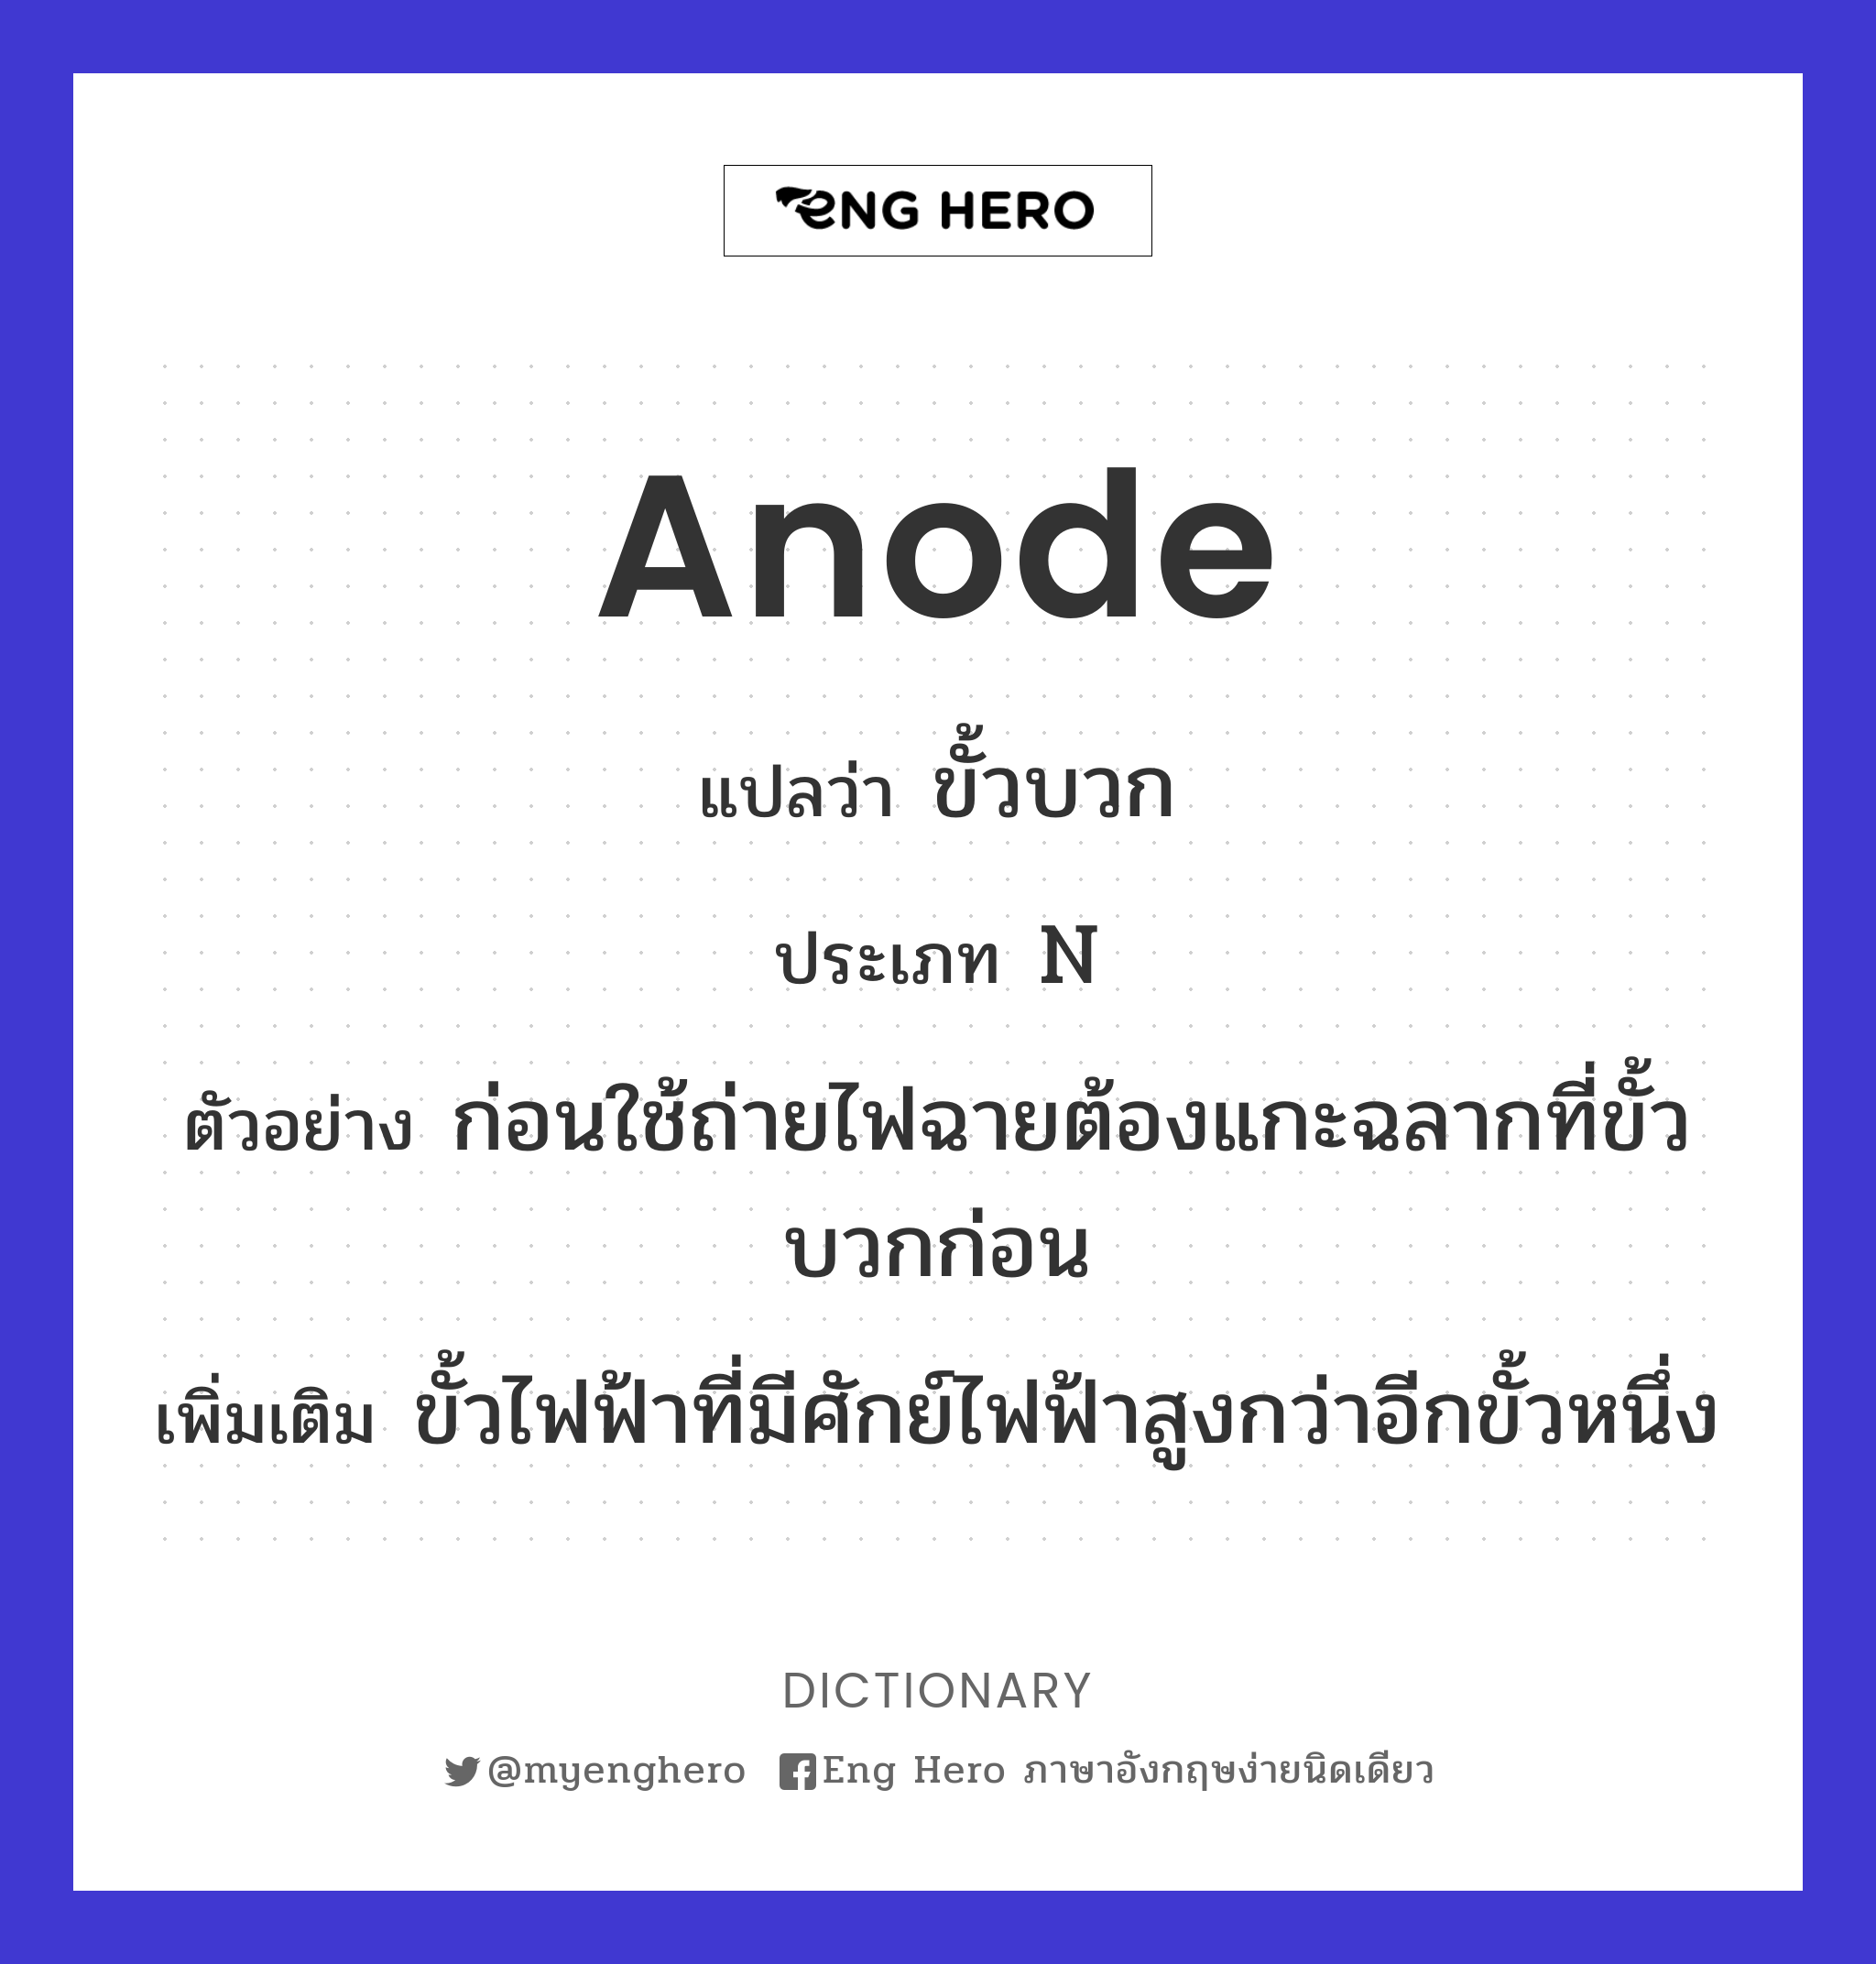 anode